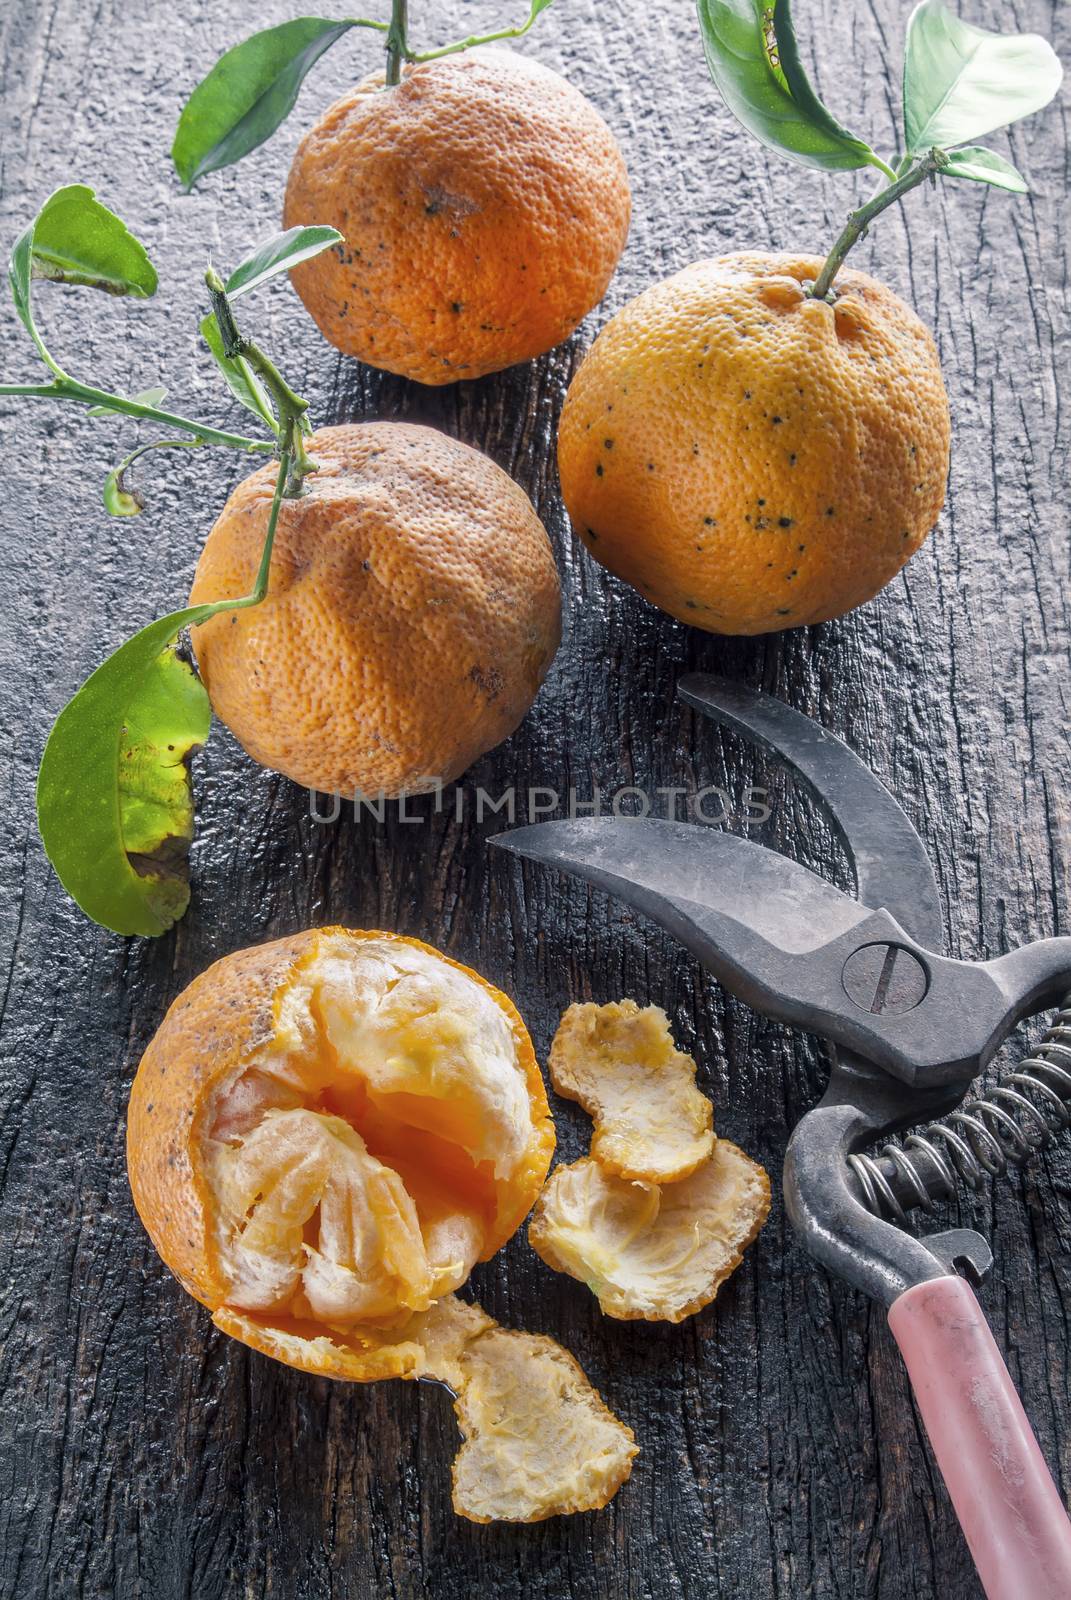 Image of a group of bitter oranges on a rustic wooden surface with pruning shears.